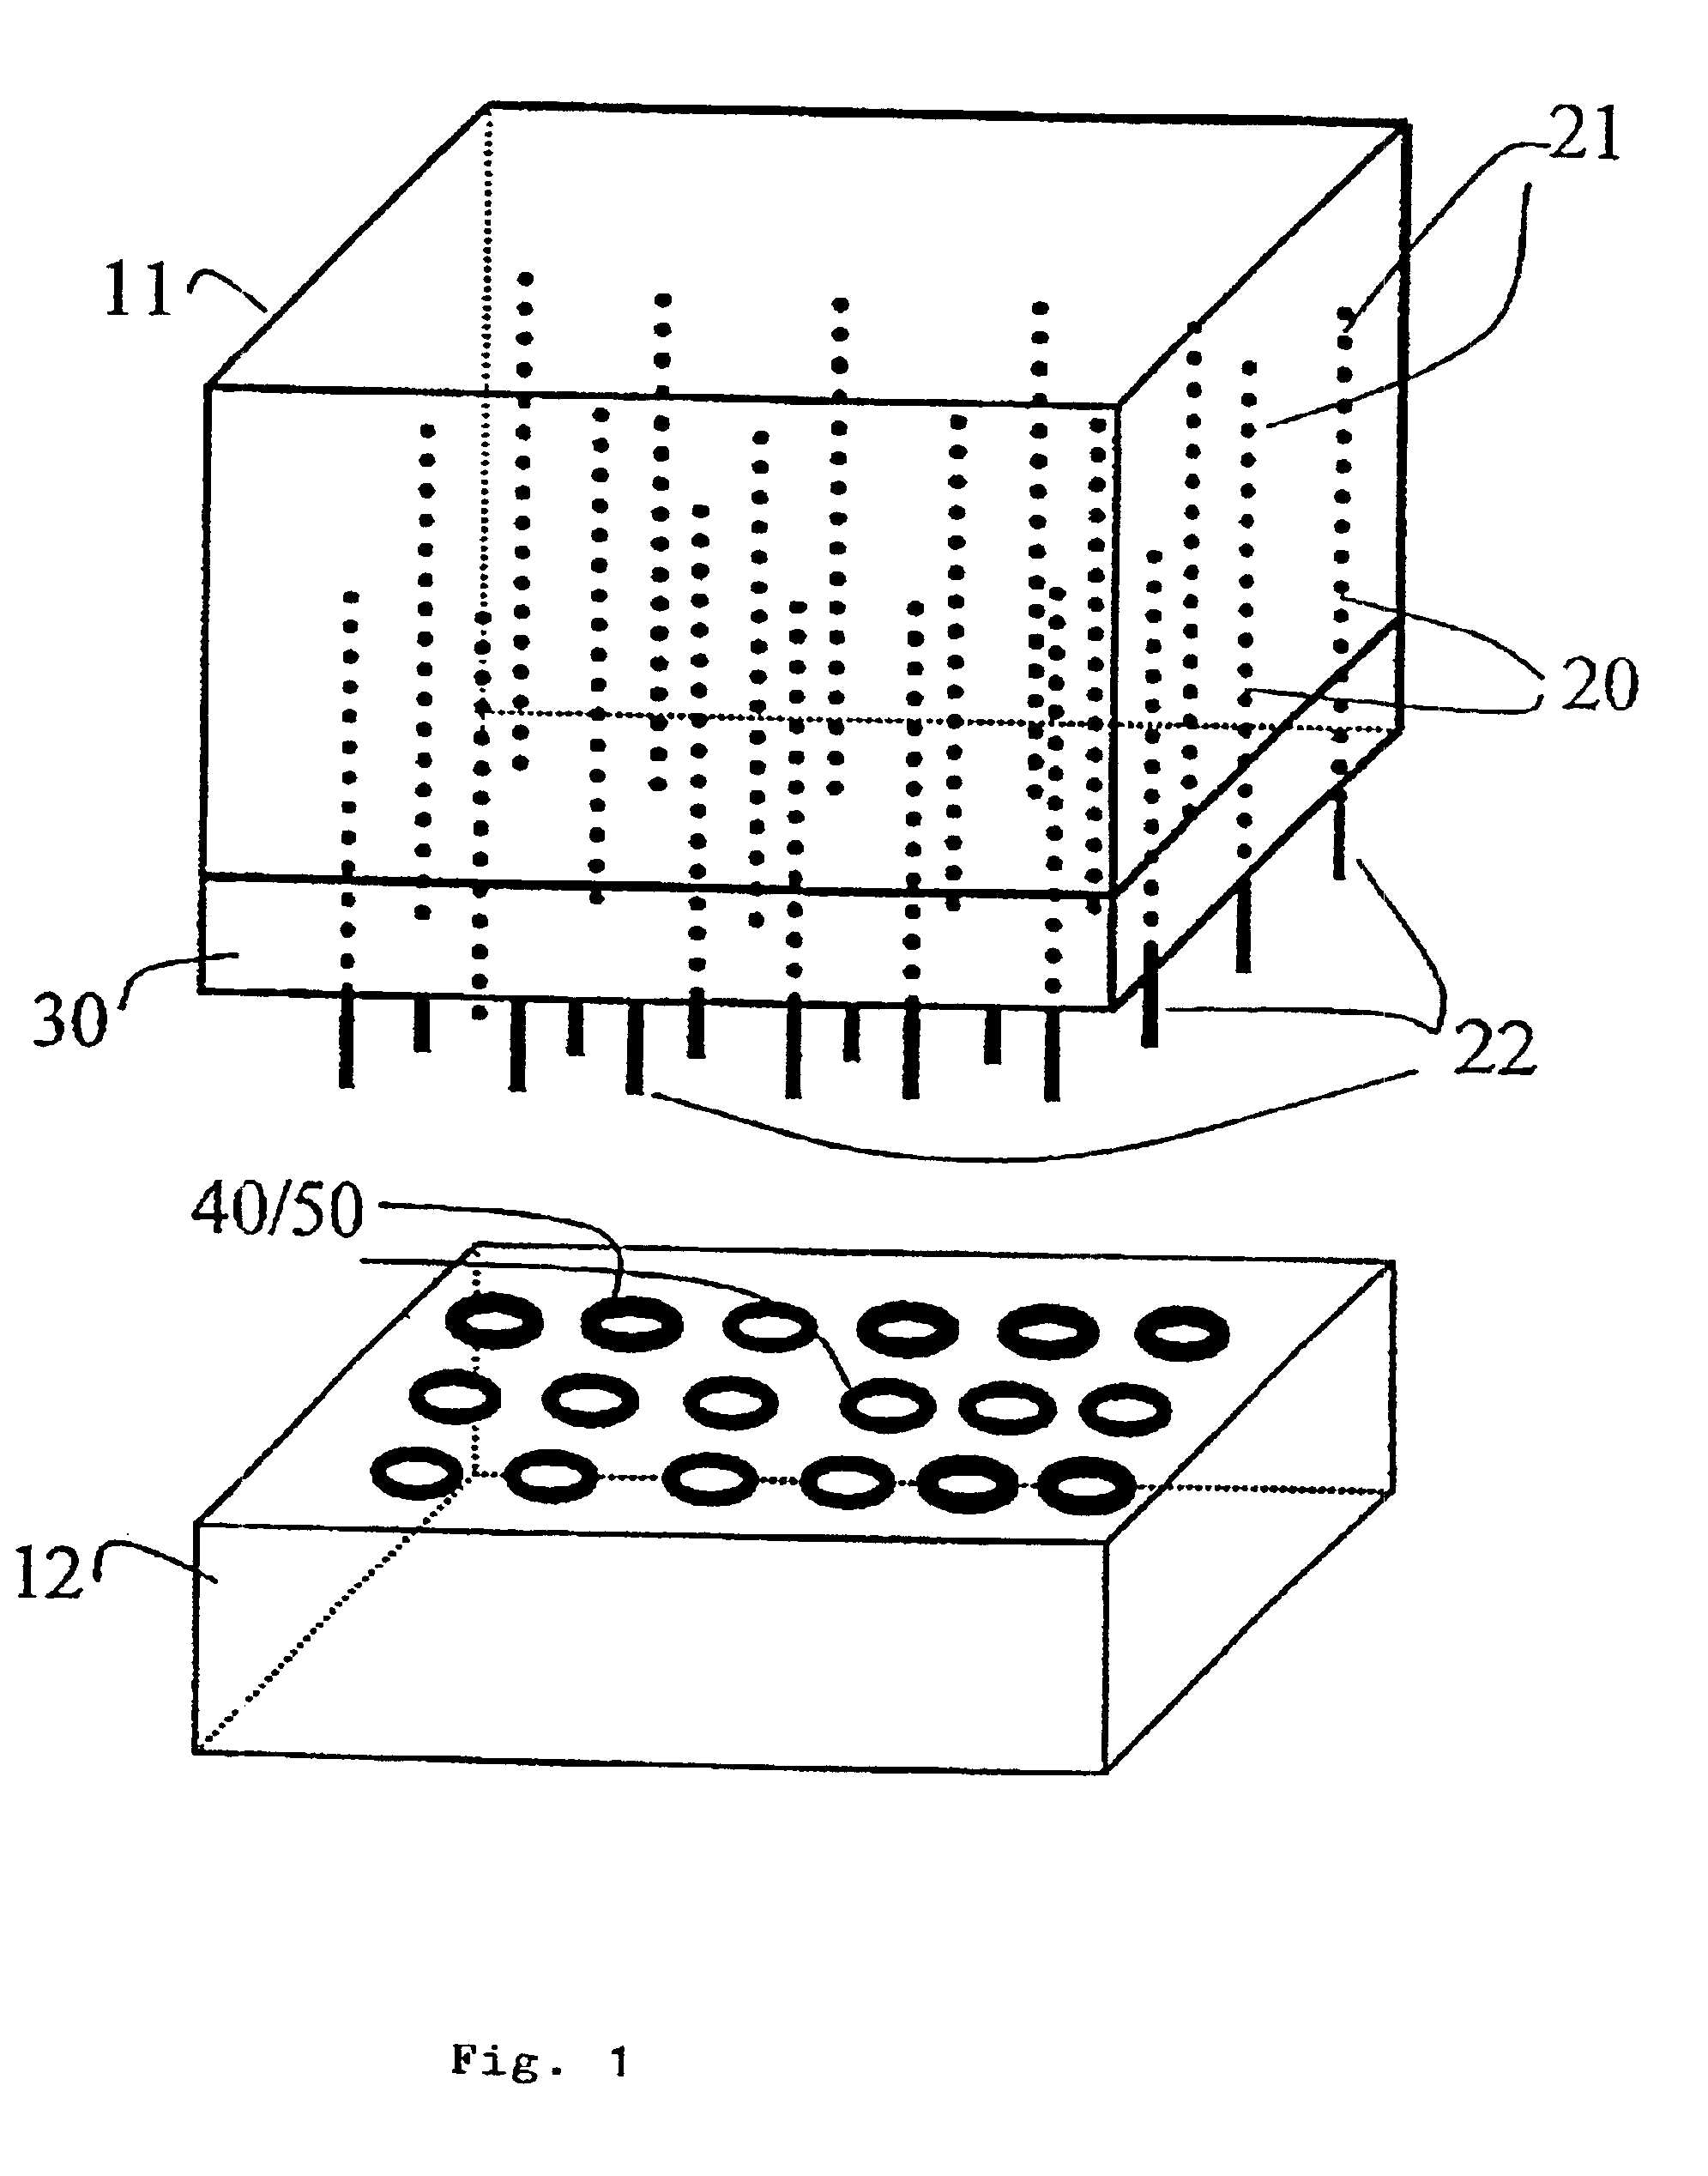 Device and method for concentration of samples by microcrystallization